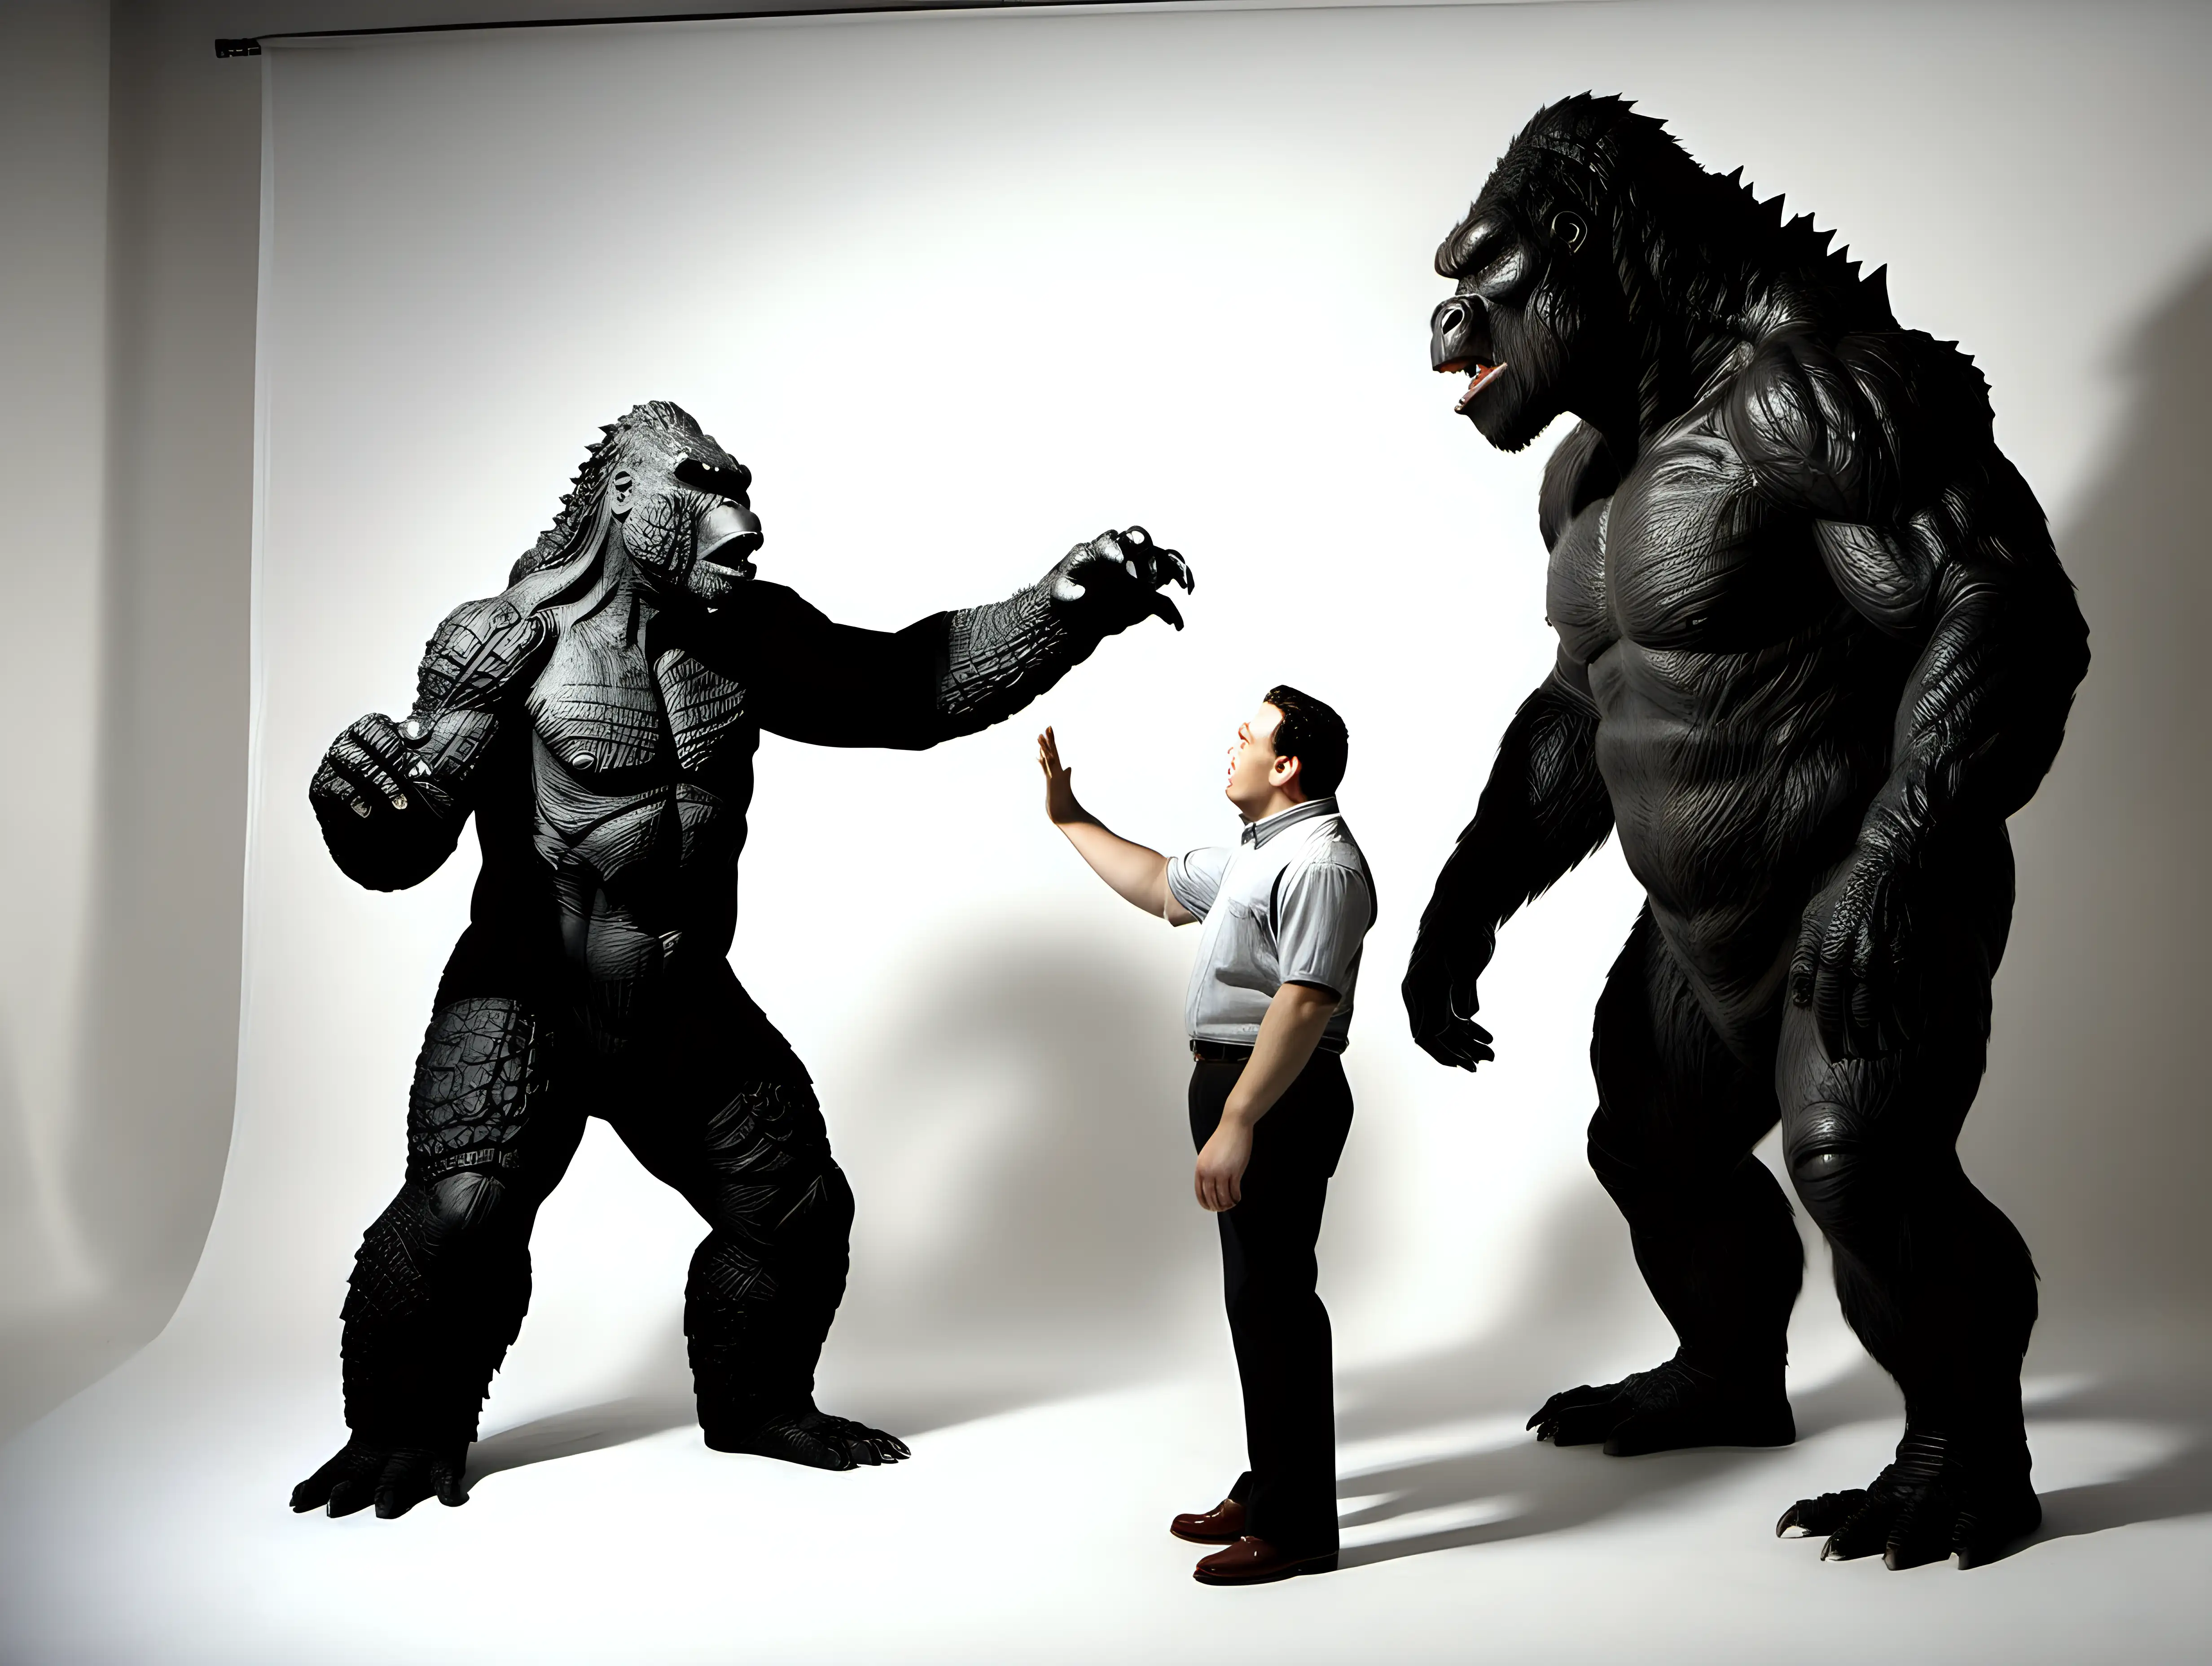 Godzilla and King Kong photographed in a portrait studio